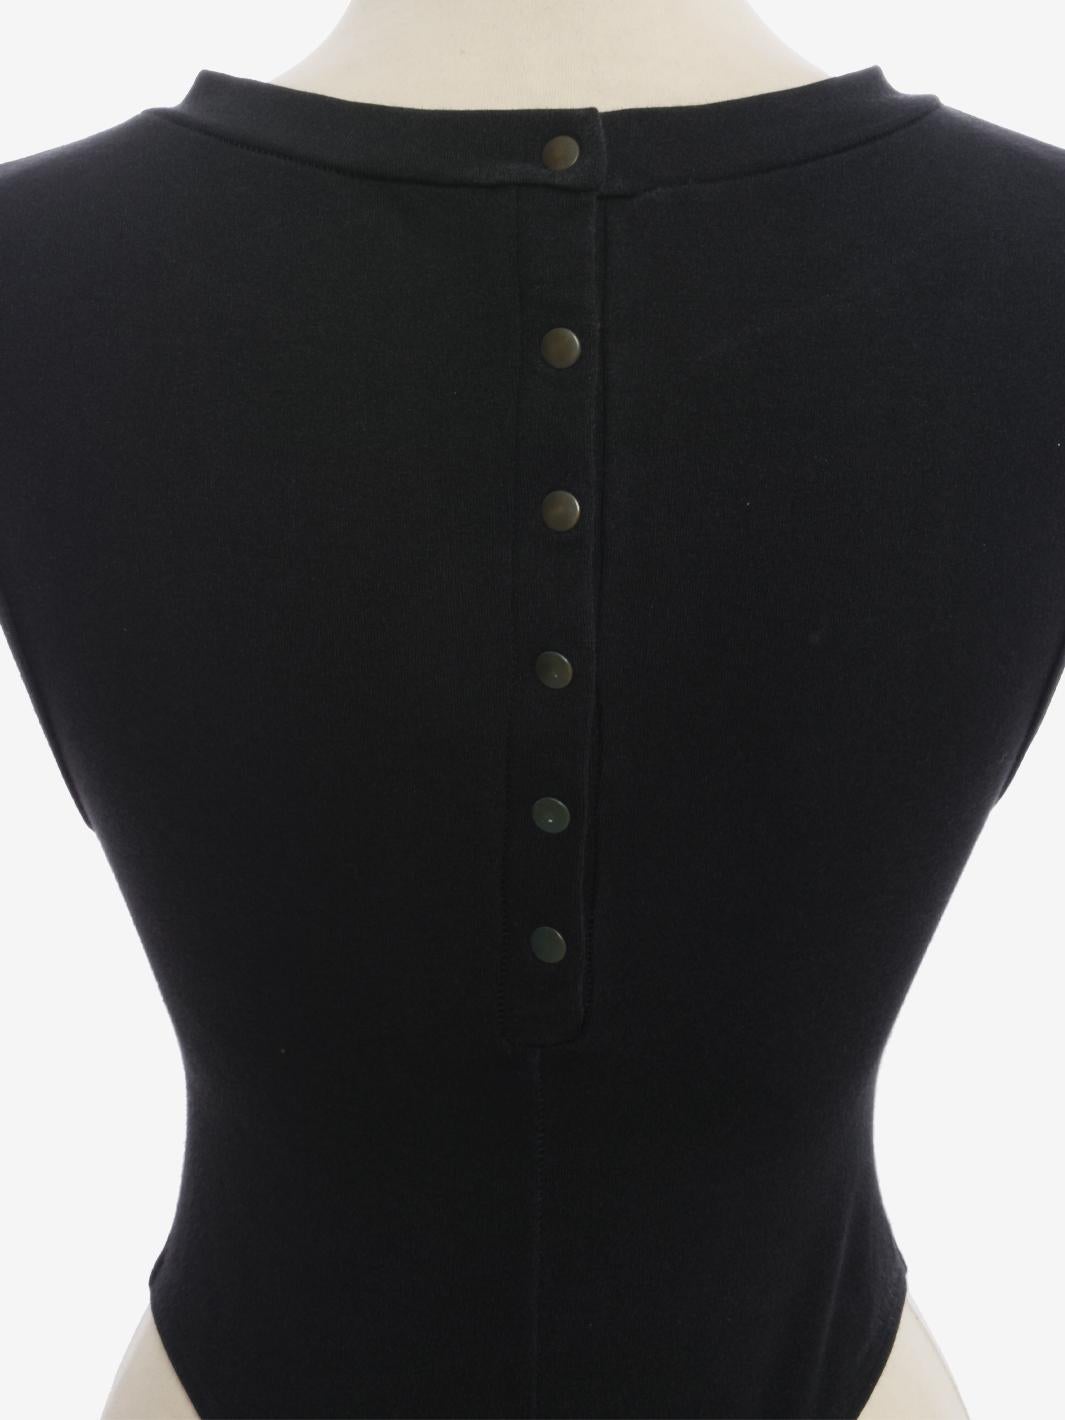 Alaïa Buttoned Bodysuit is a raregarment made by Azzedine Alaïa in the second half of 1980. Features a clip-on button back closure and round neckline. Typical hight cut legs of the period.

CONDITION
Very good vintage condition

LABEL
Alaïa - Made